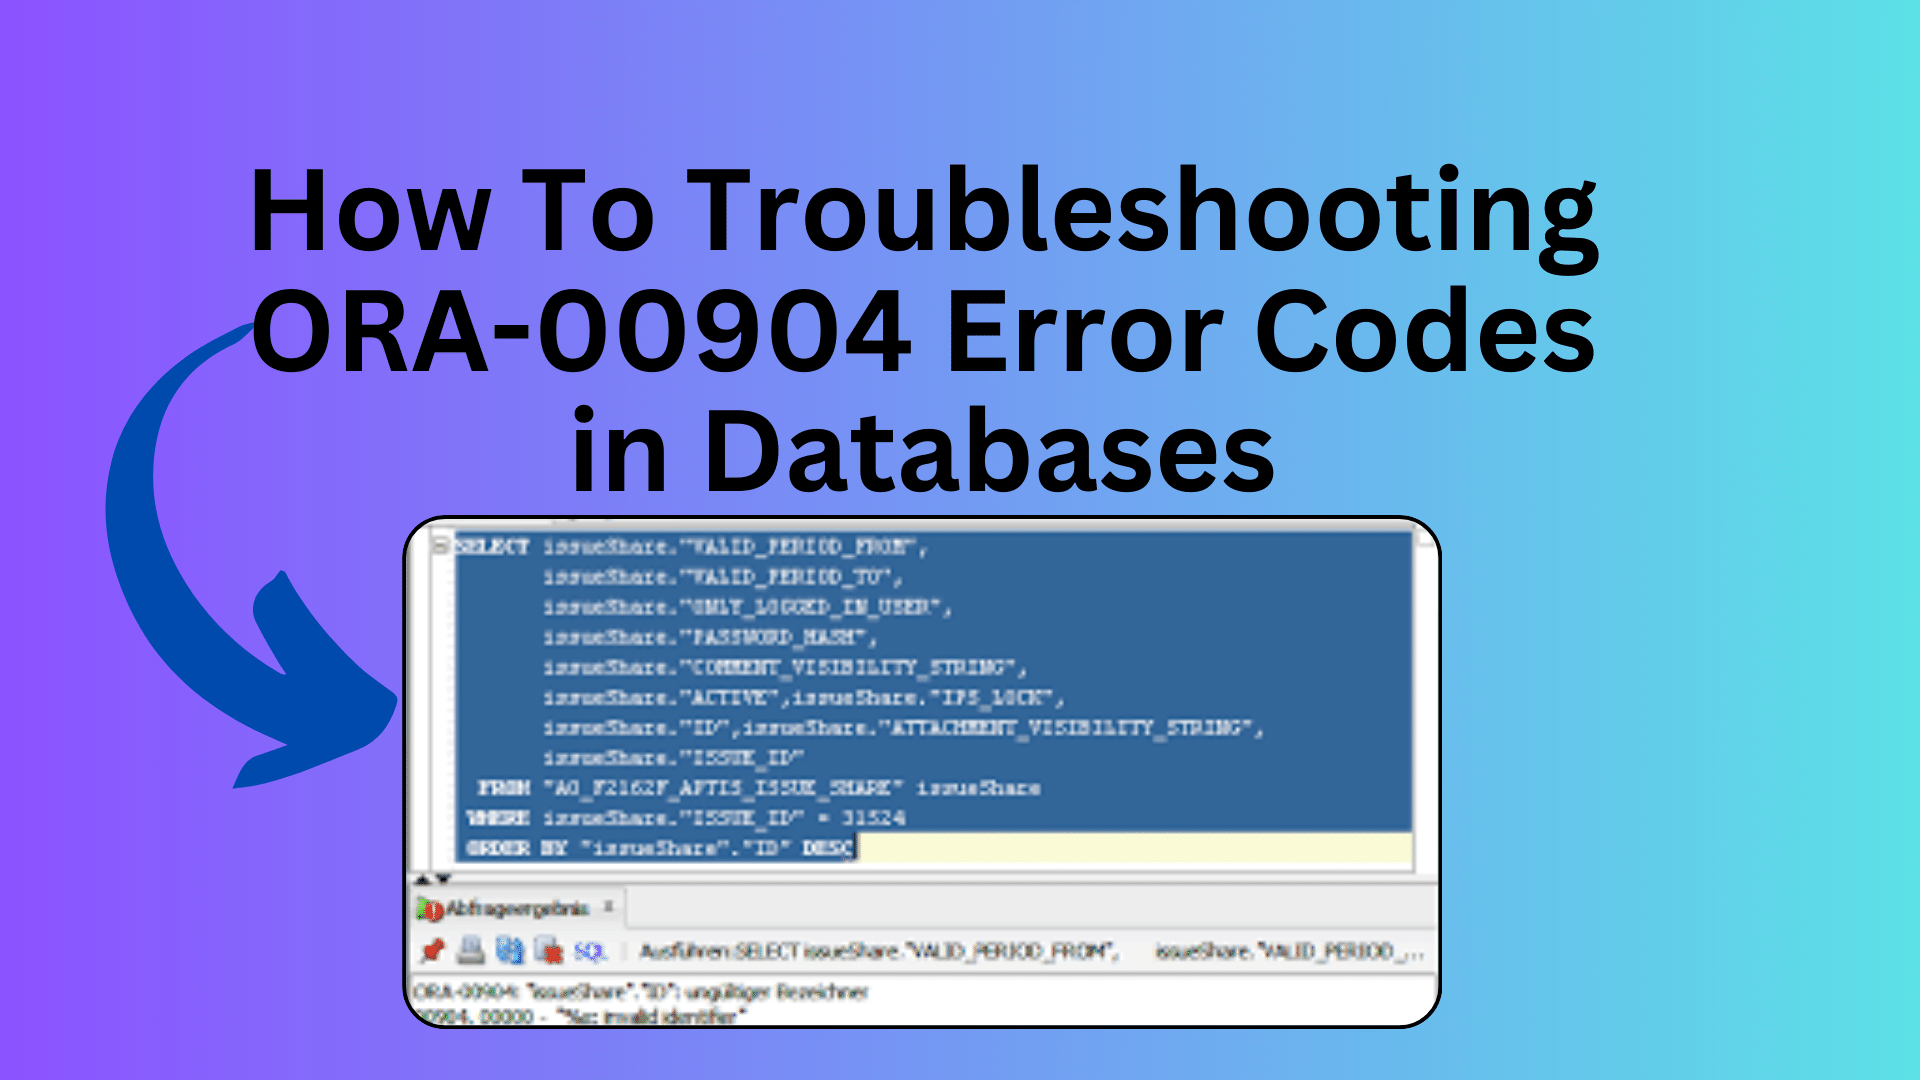 How To Troubleshooting ORA-00904 Error Codes in Databases